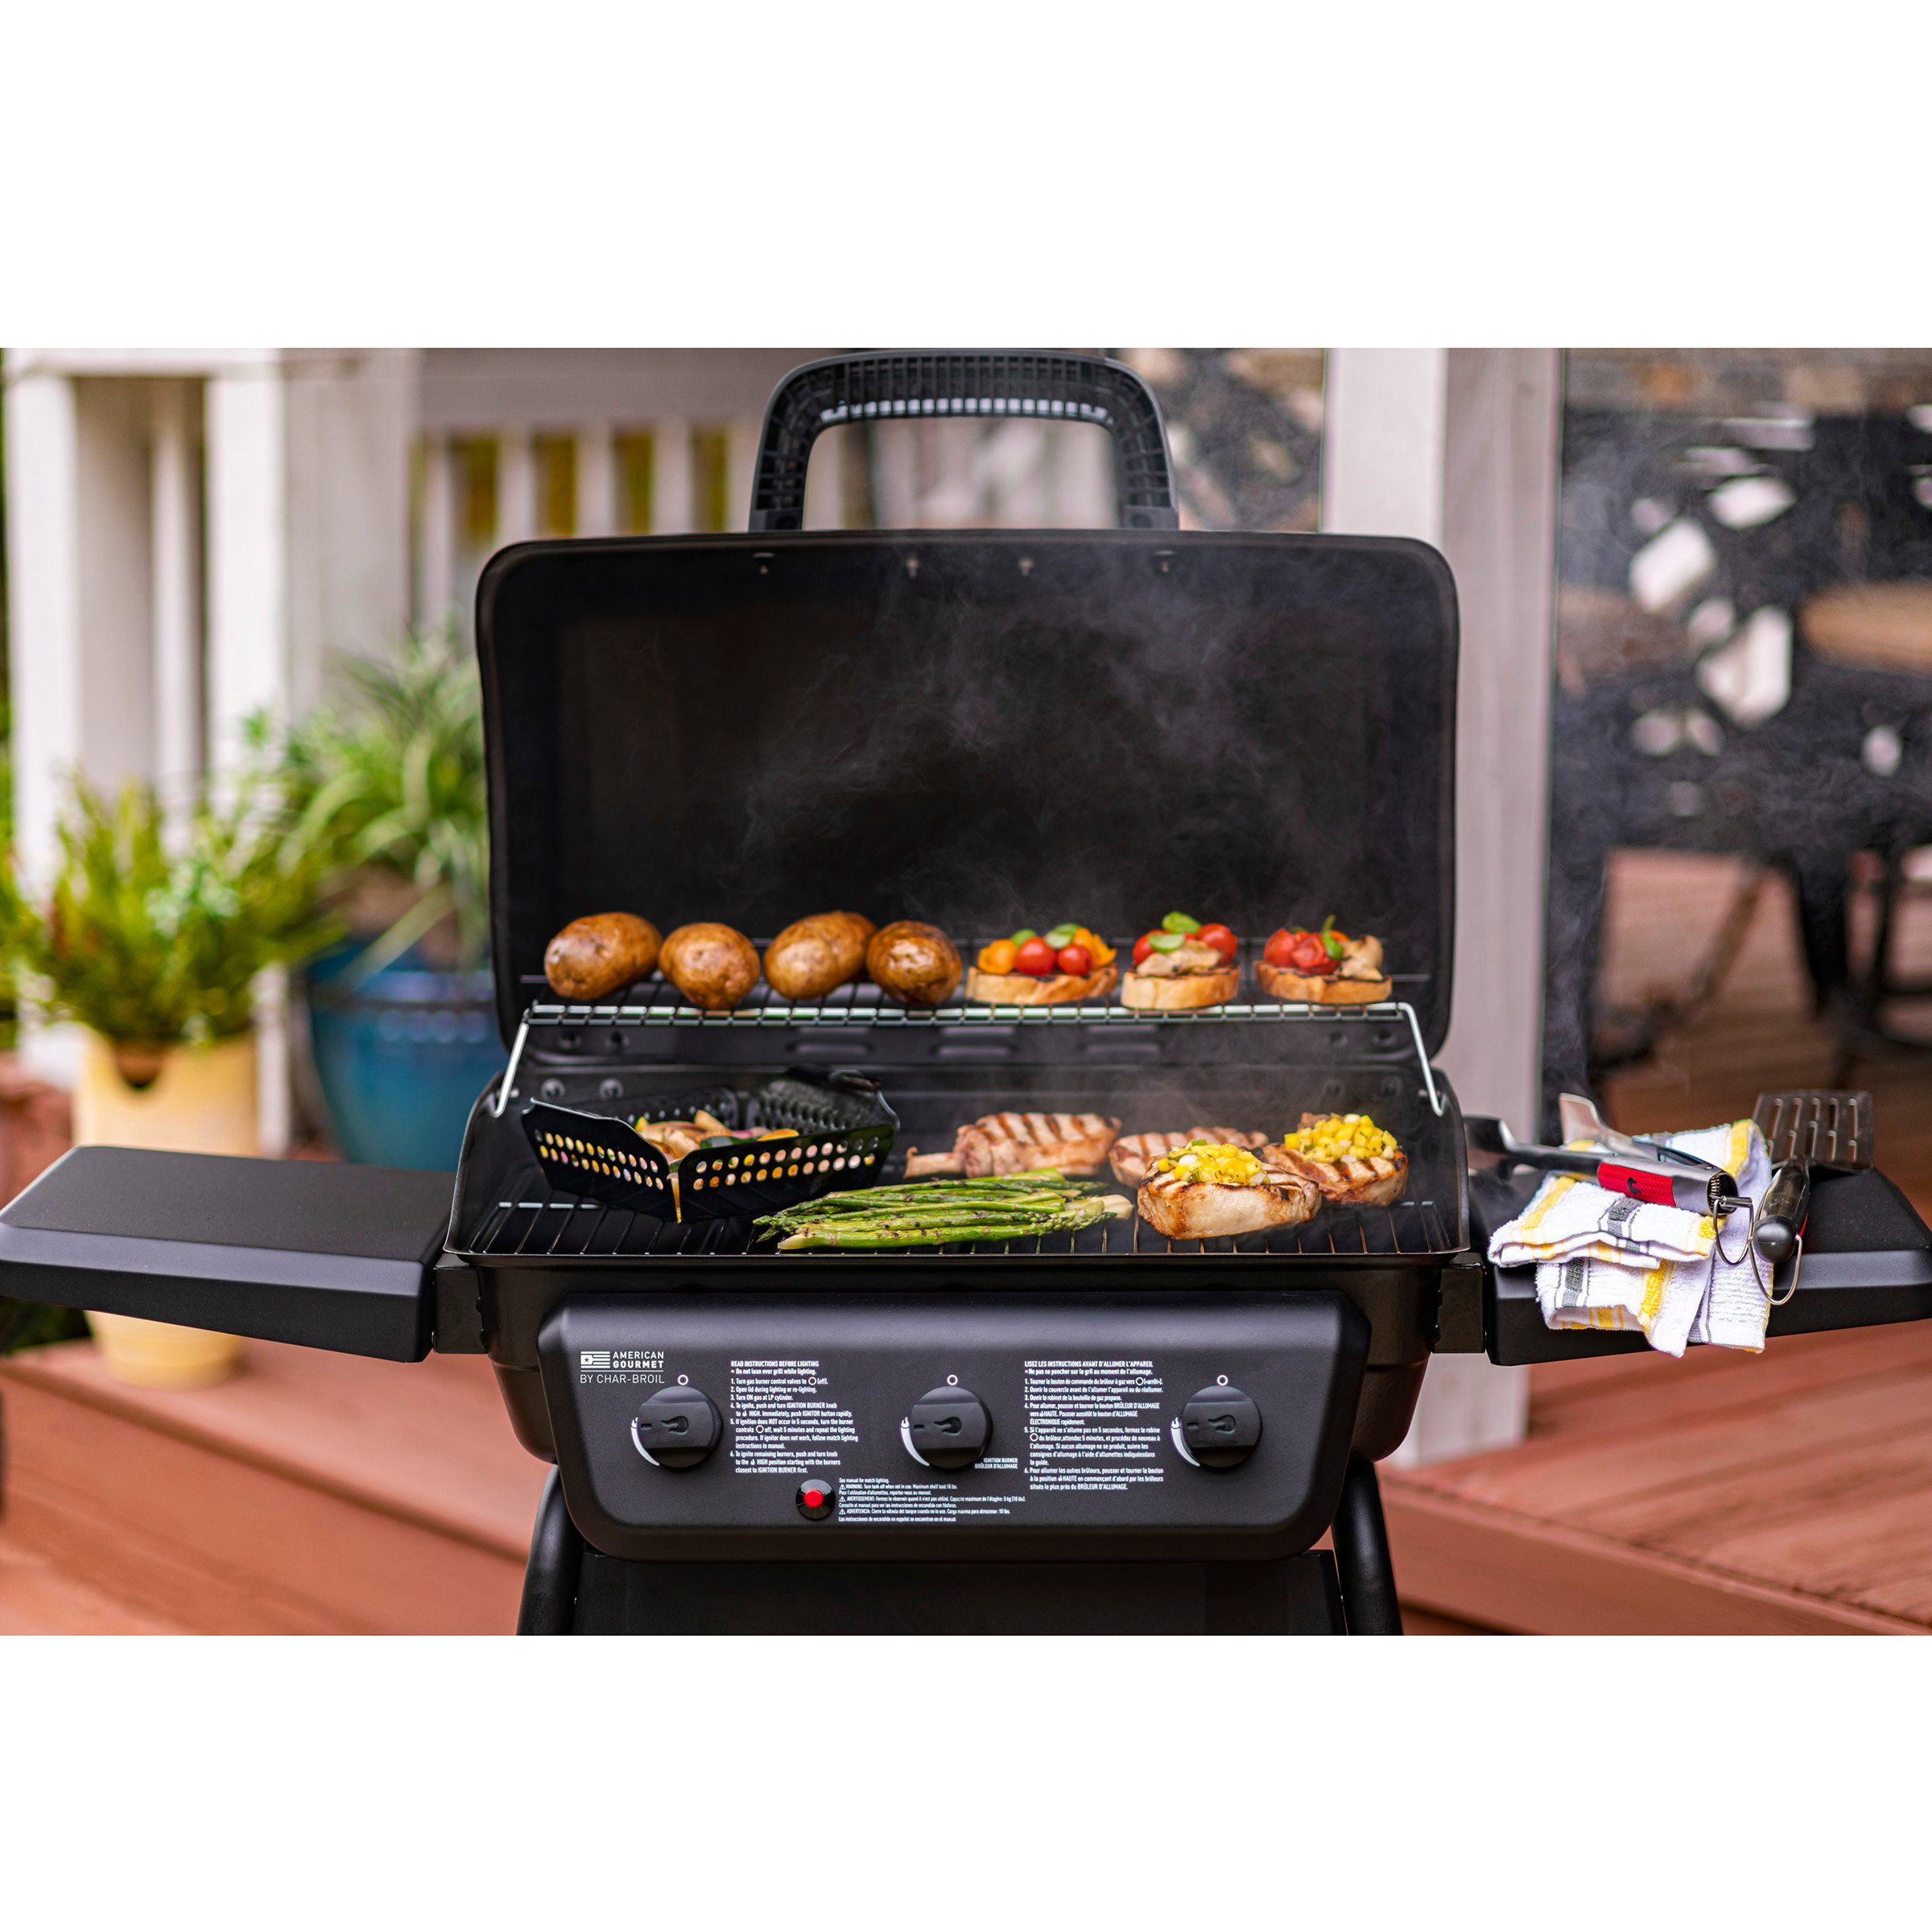 Hobart Chaiselong Ass American Gourmet Classic Series 3-Burner Gas Grill by Char-Broil - Shop  Grills & Smokers at H-E-B